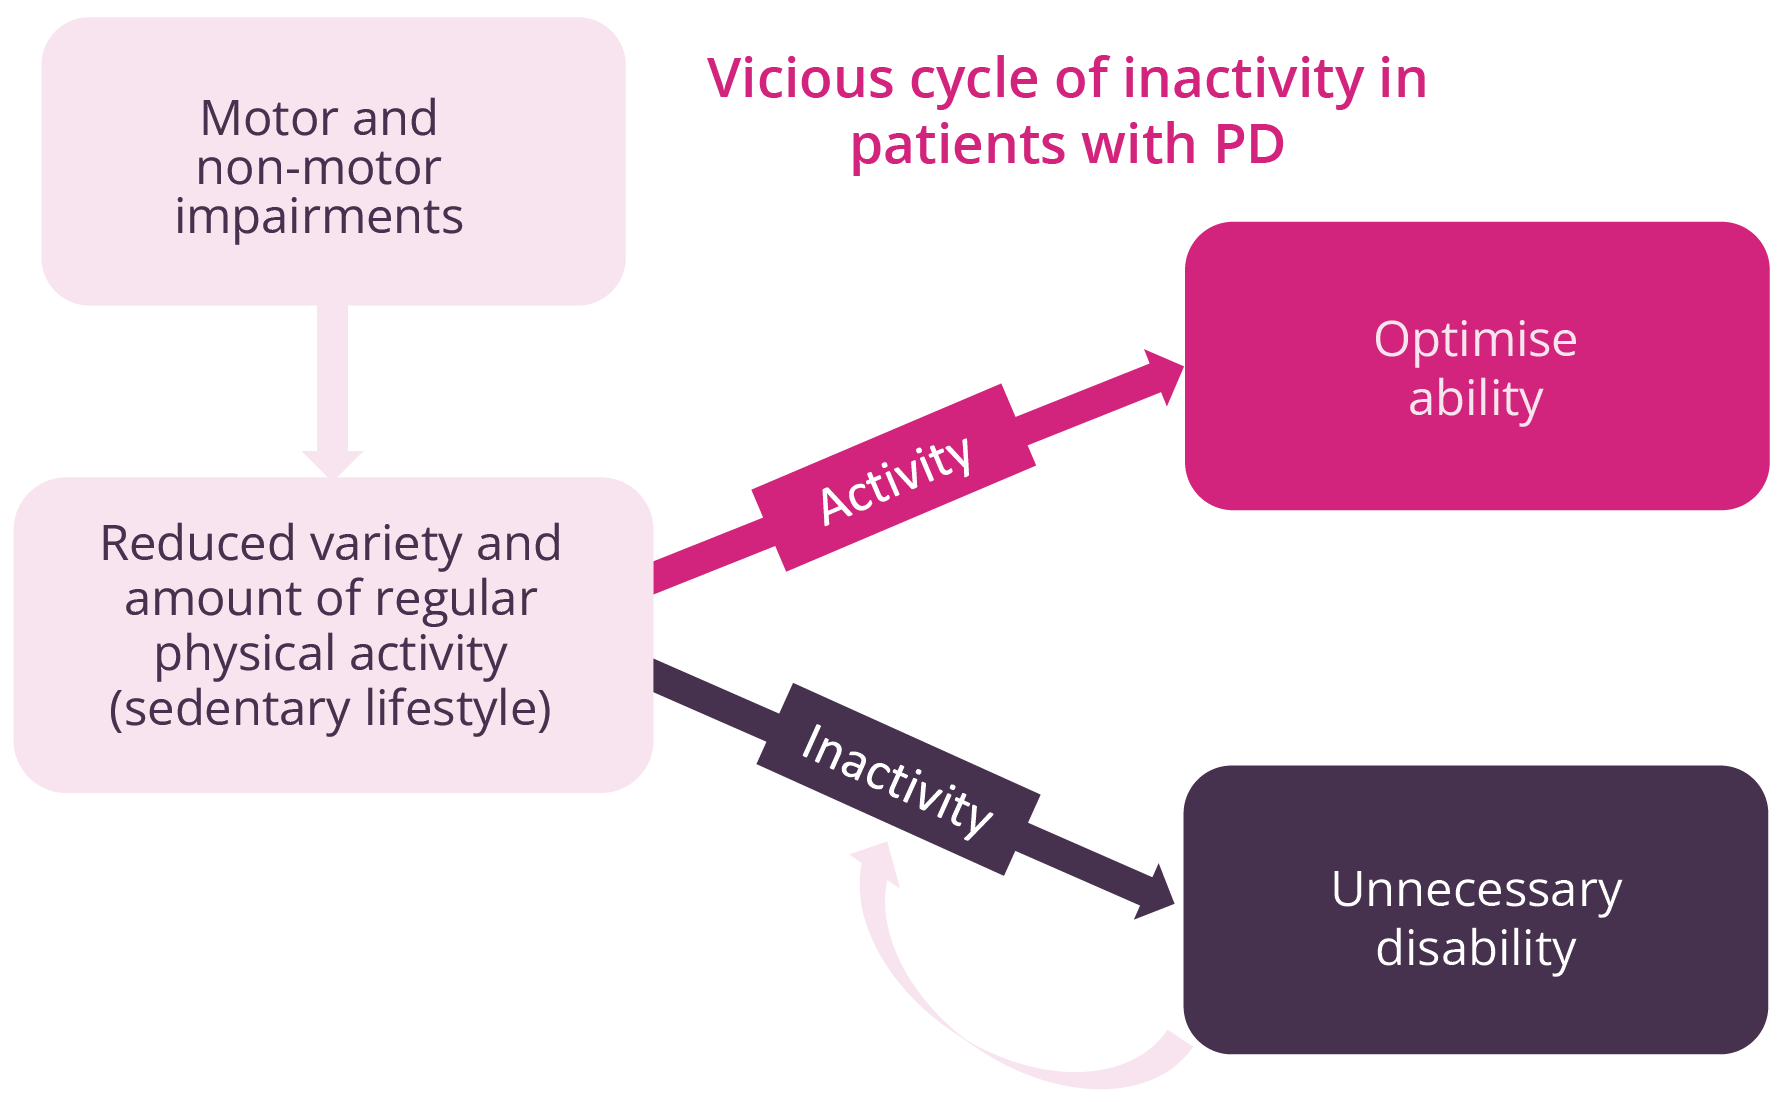 Vicious cycle of inactivity in patients with PD